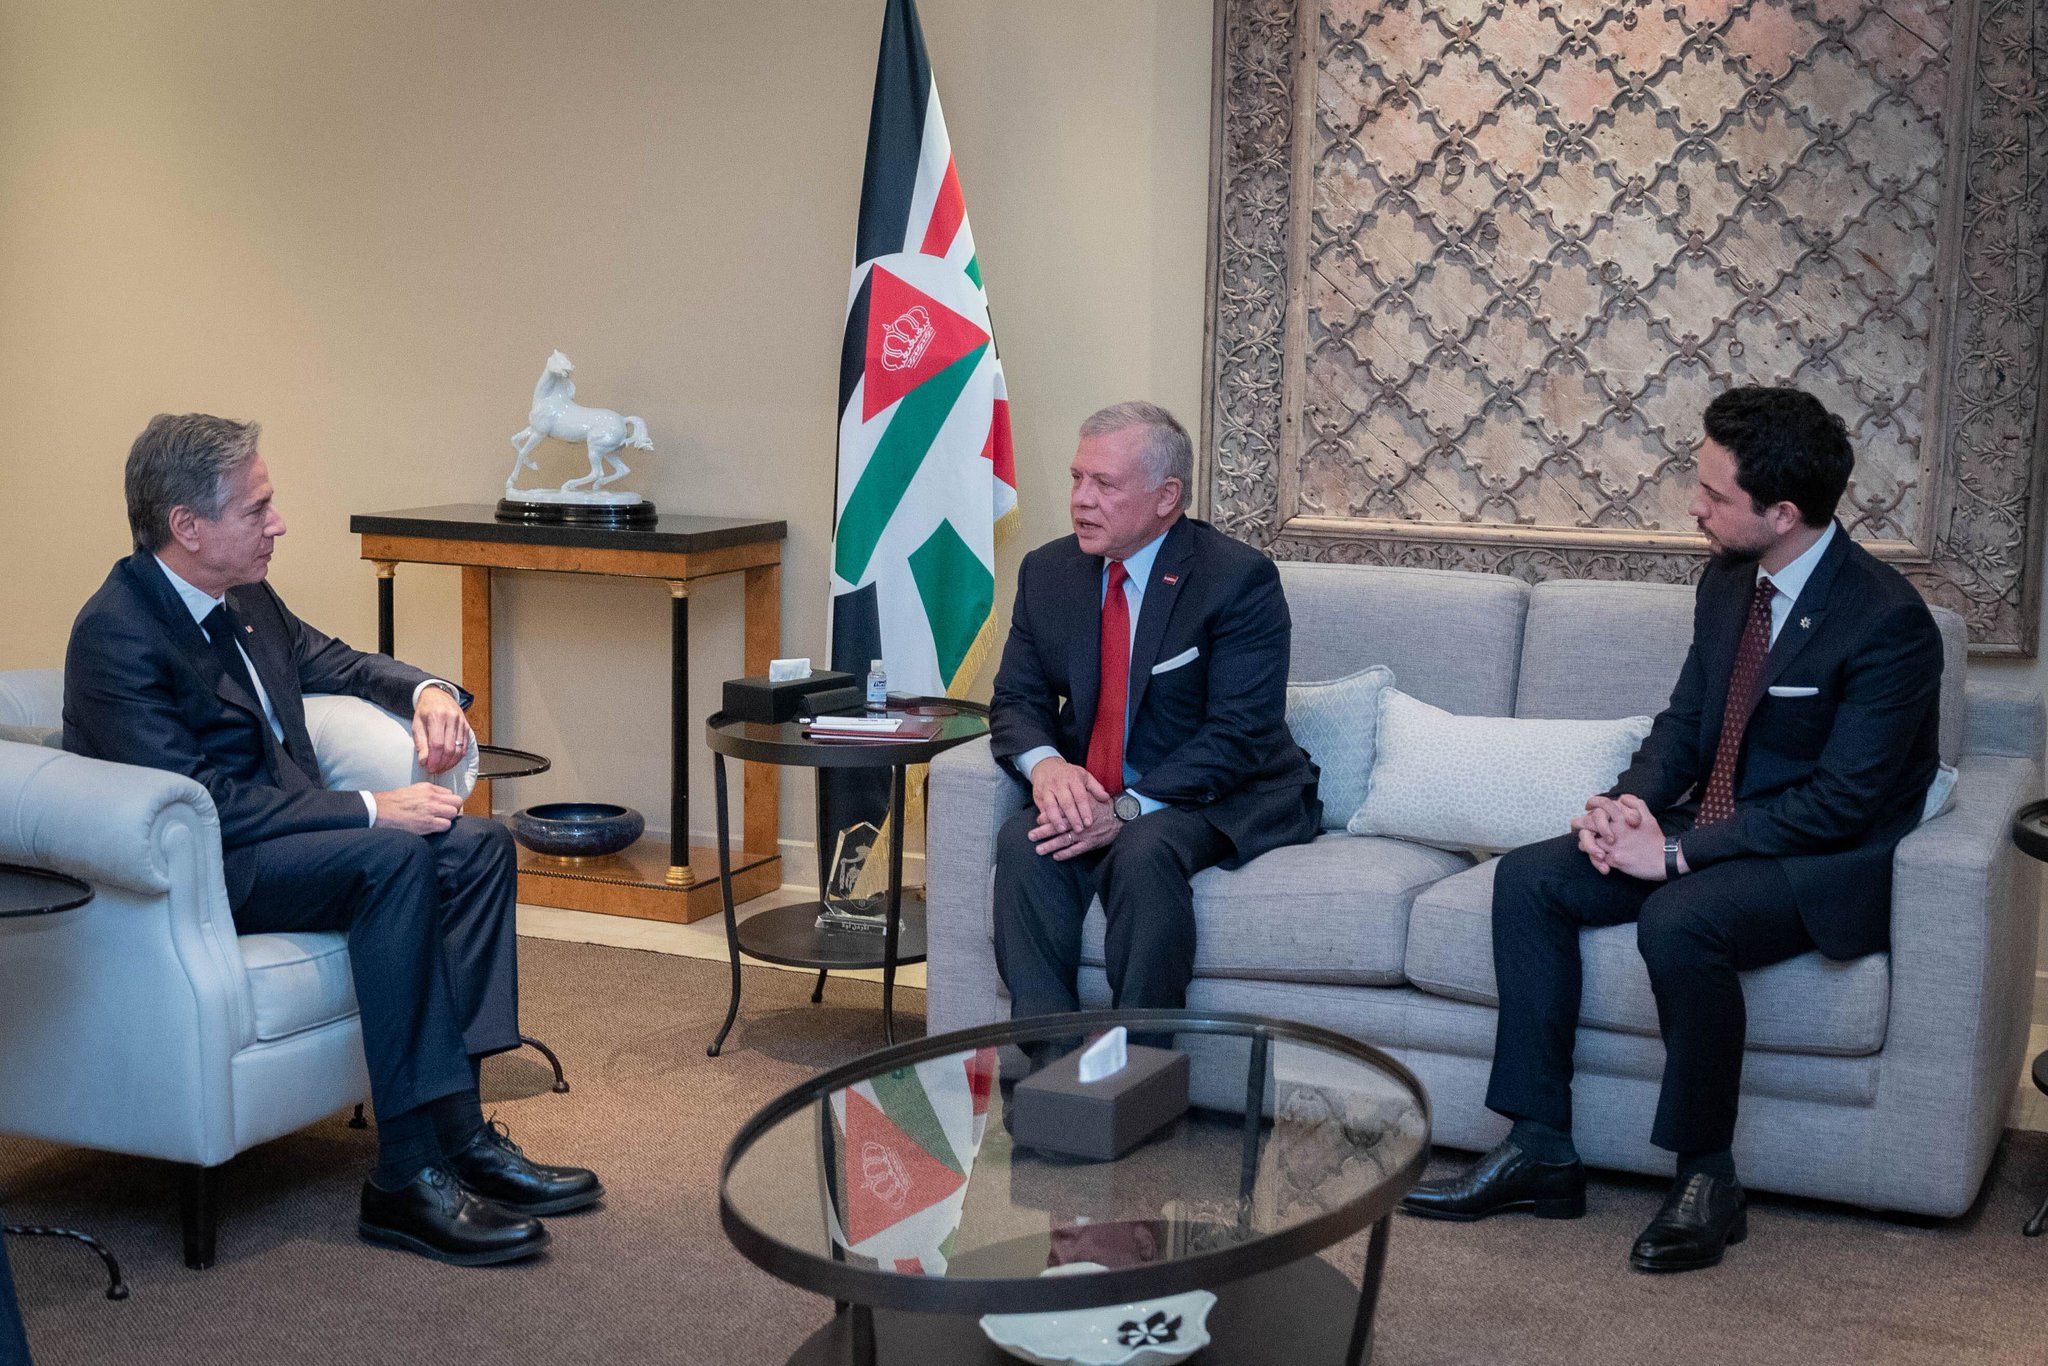 Secretary Antony Blinken  @SecBlinken Met with  @KingAbdullahII  and Crown Prince Al Hussein on the Israel-Hamas conflict and our work to facilitate the delivery of humanitarian assistance to civilians in Gaza.